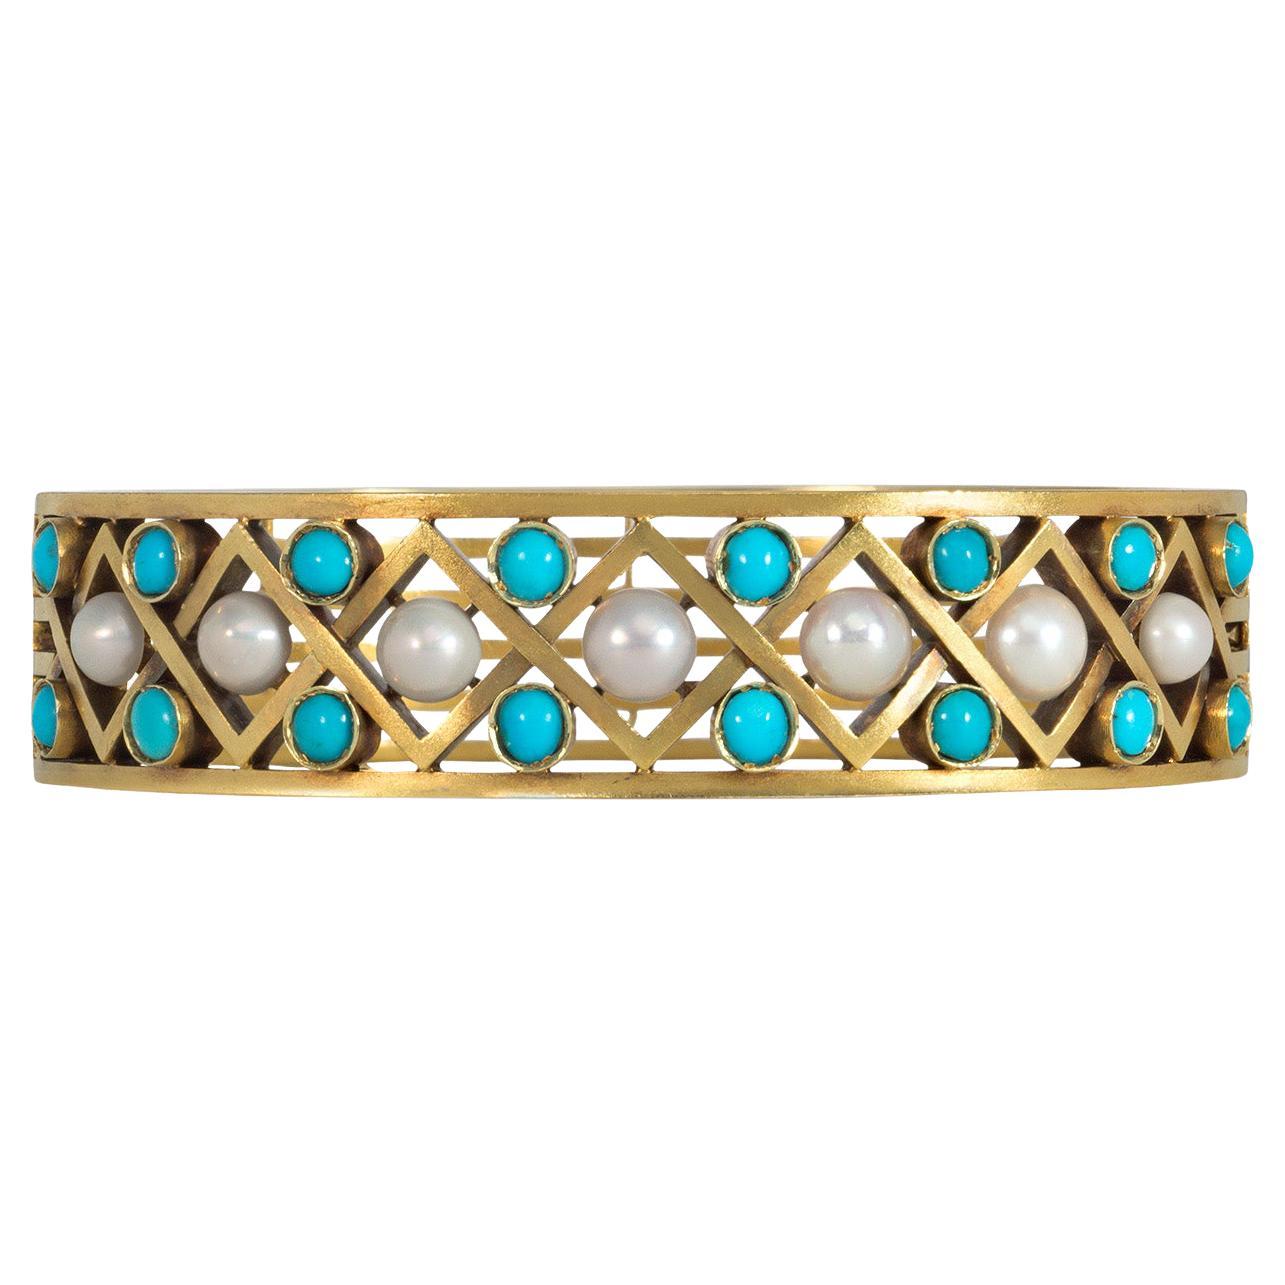 Antique Gold, Turquoise, and Pearl Openwork Bangle Bracelet with Lattice Design For Sale